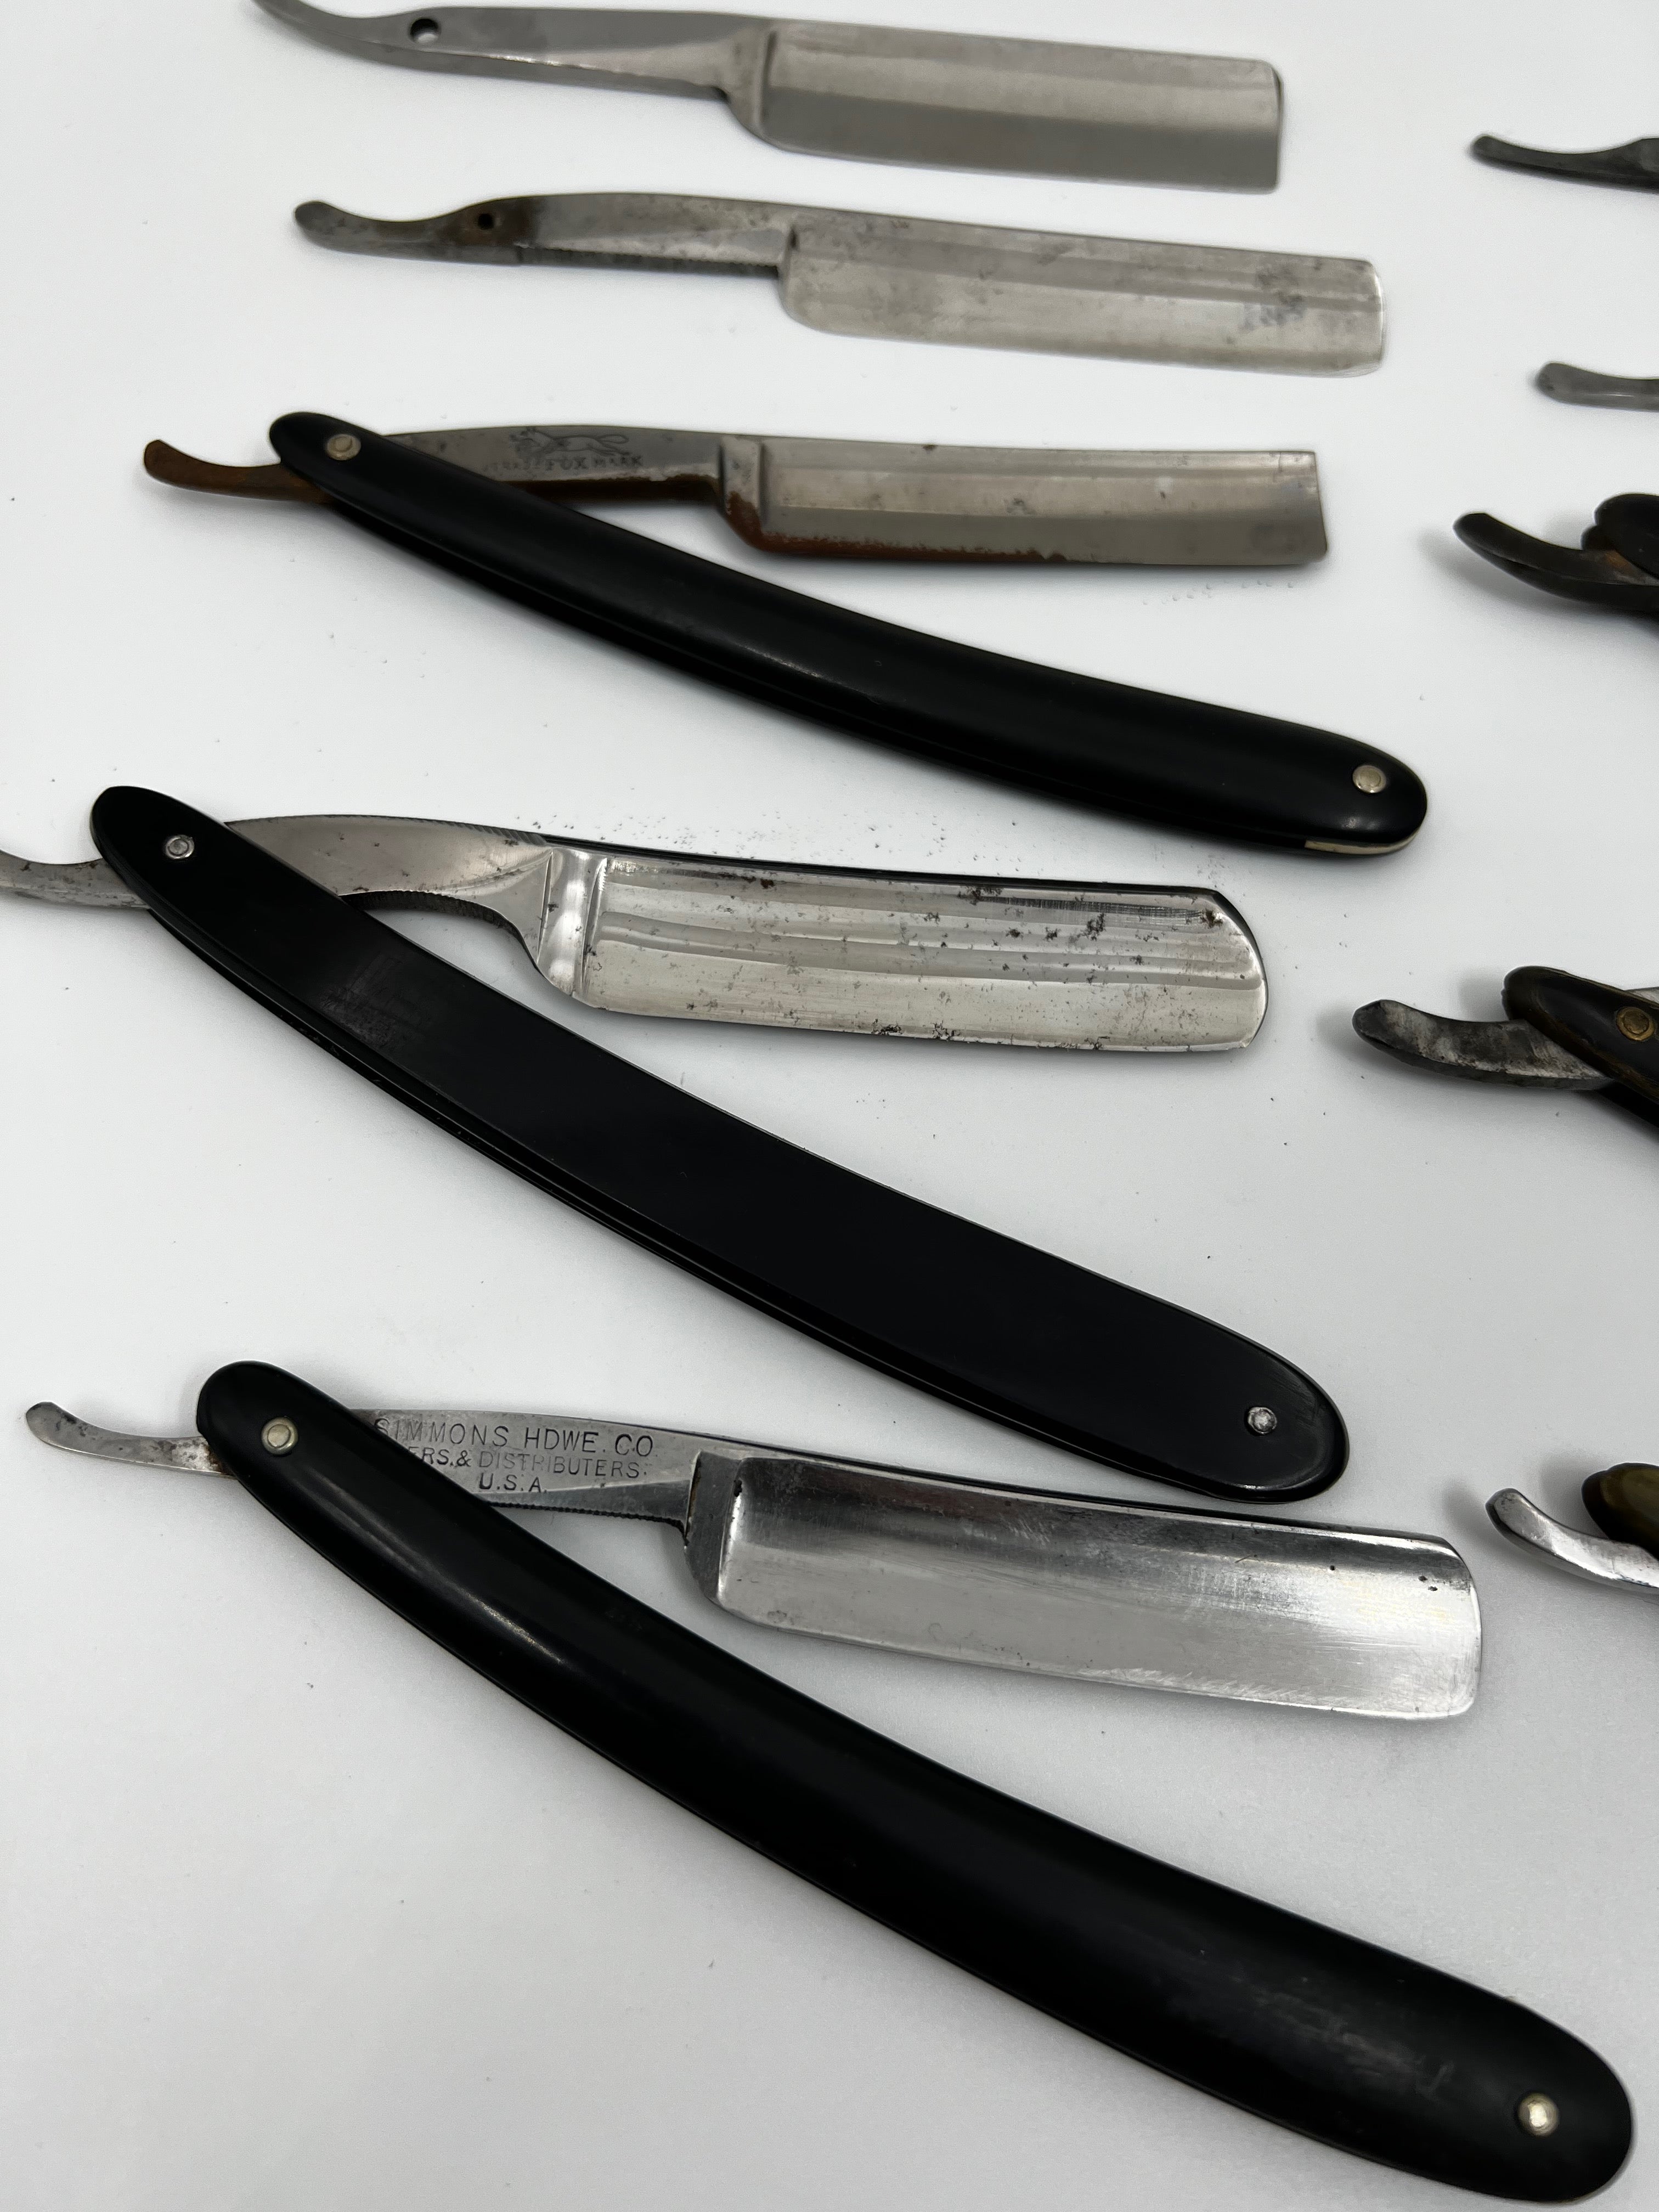 Vintage 10 Straight Razor Lot #4 - May Contain Sheffield, Solingen, Japanese & USA makers, as pictured